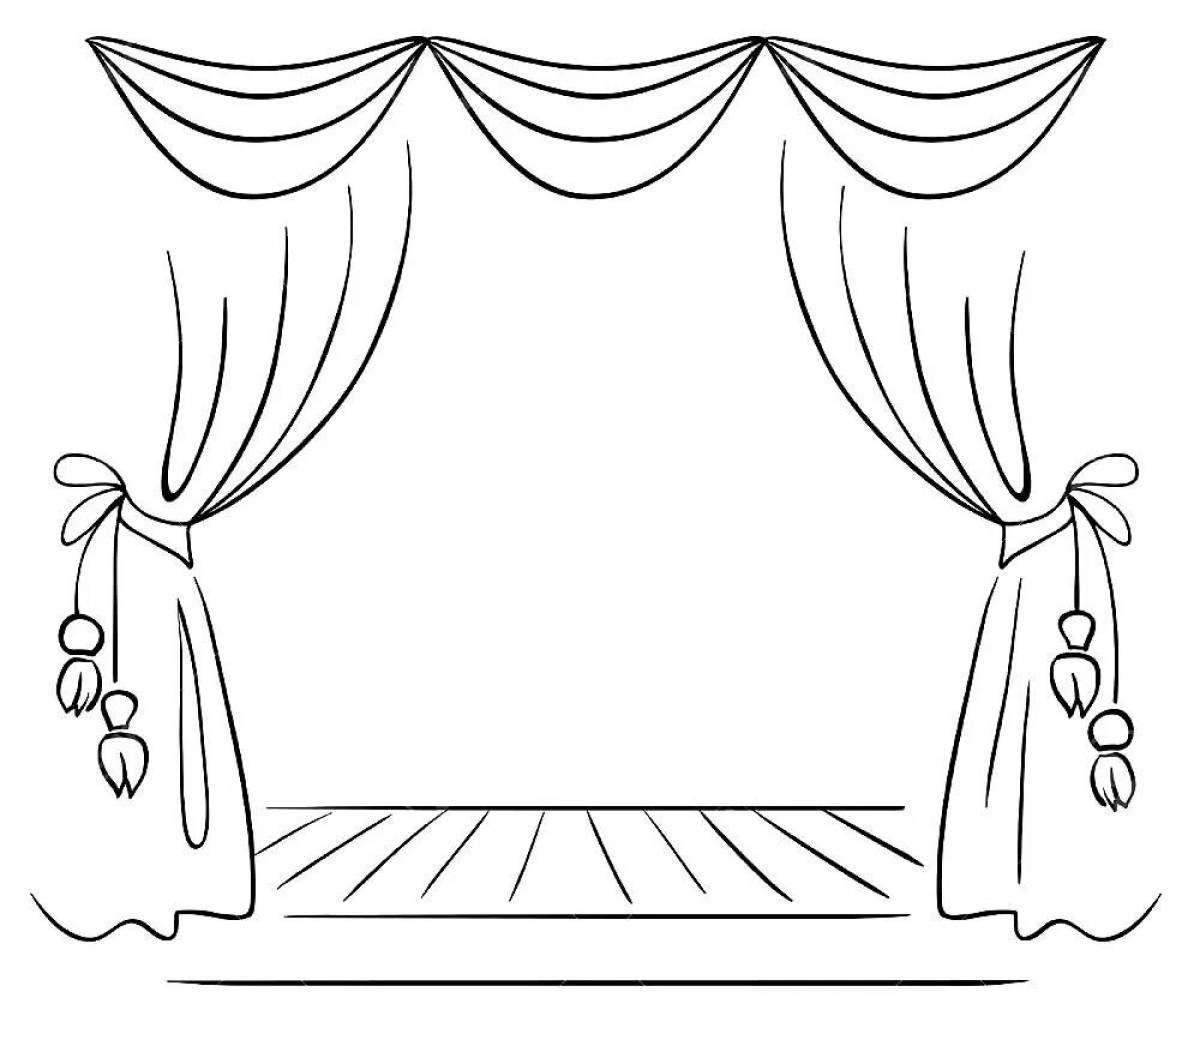 Coloring page welcoming theater stage